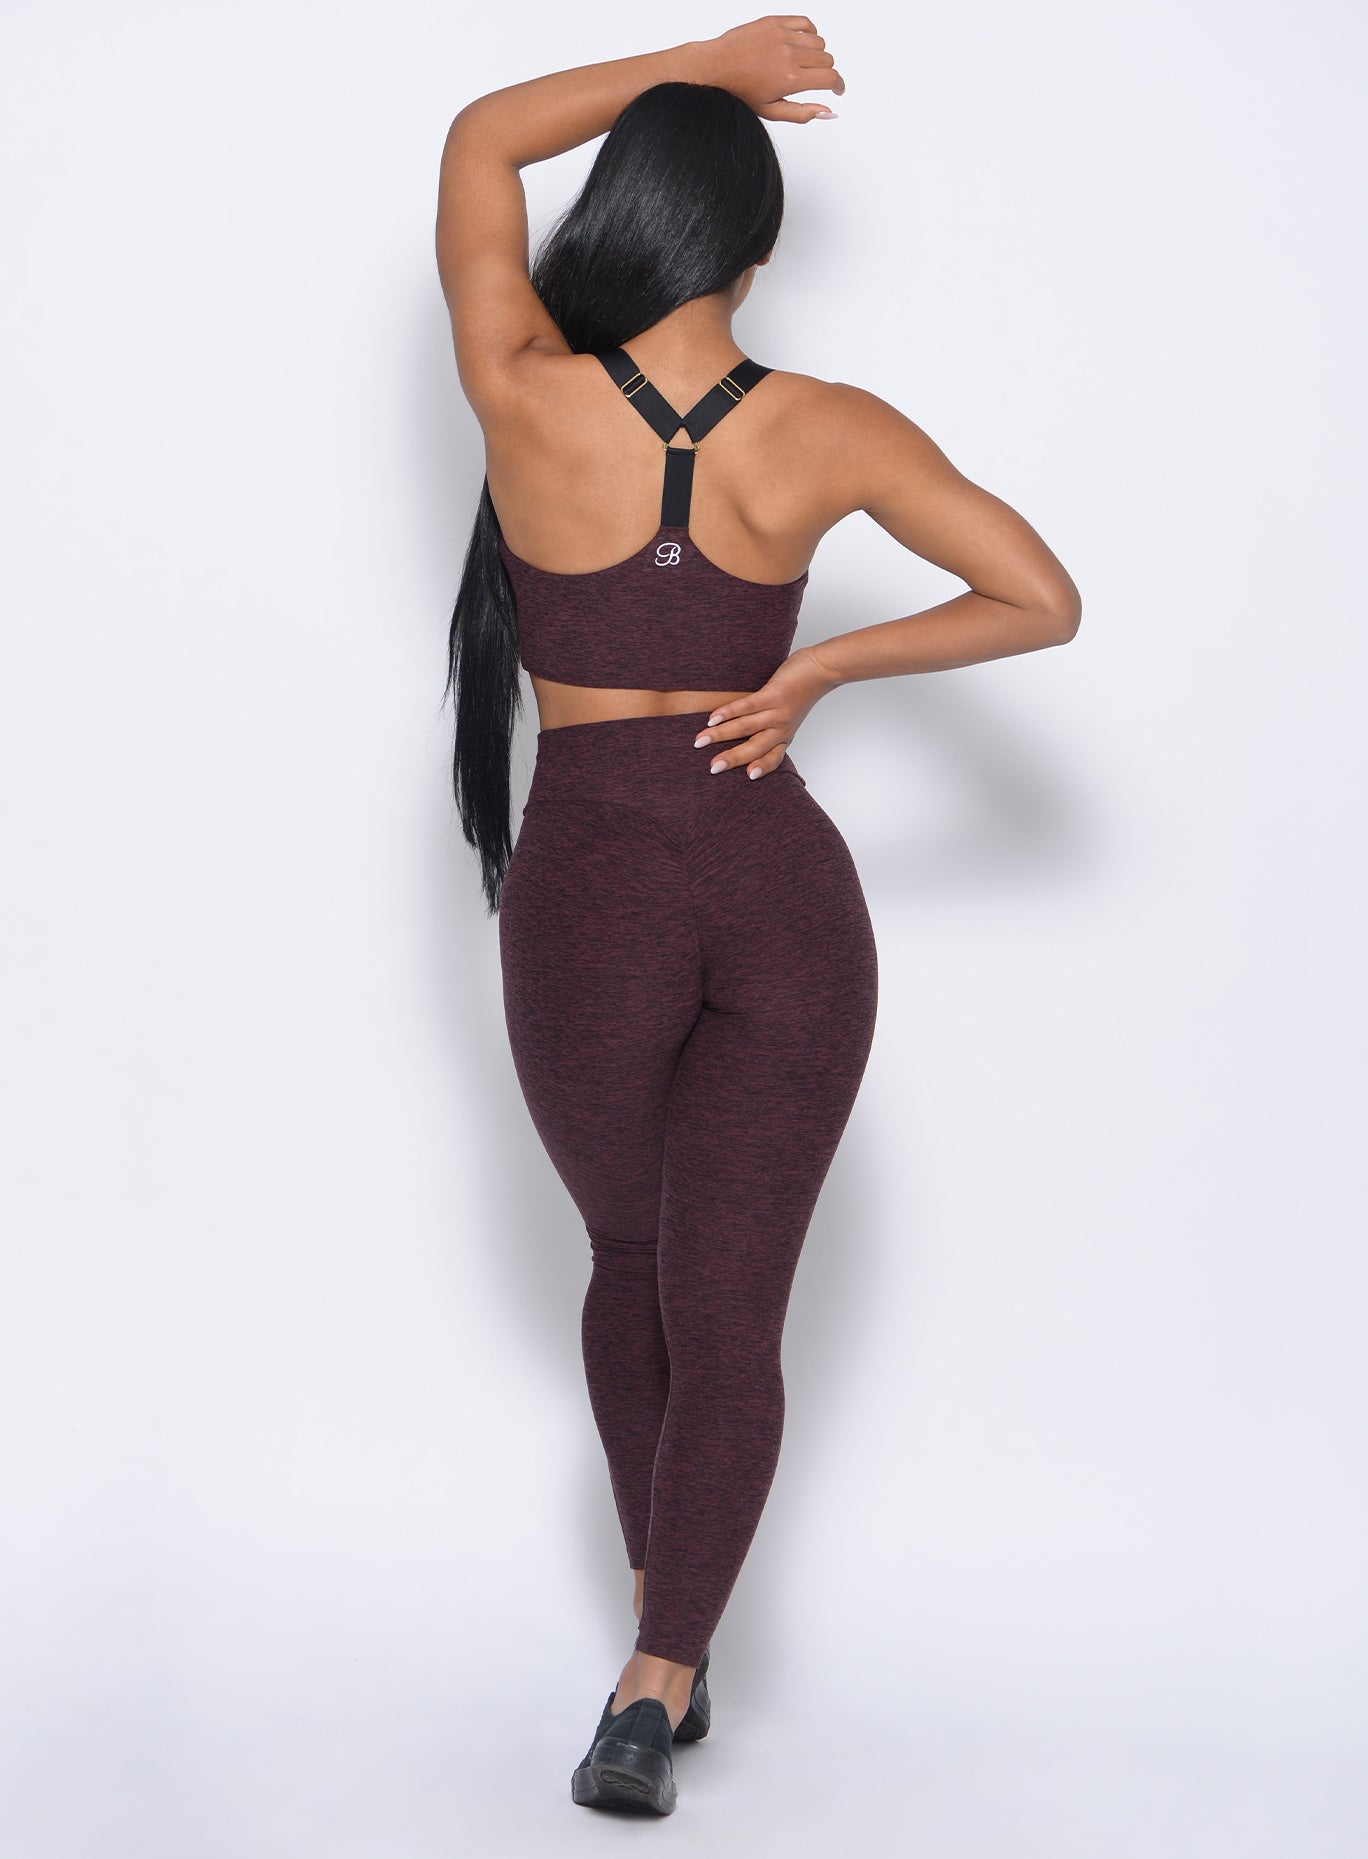 Back view of the model wearing our boost leggings in port color and a matching bra